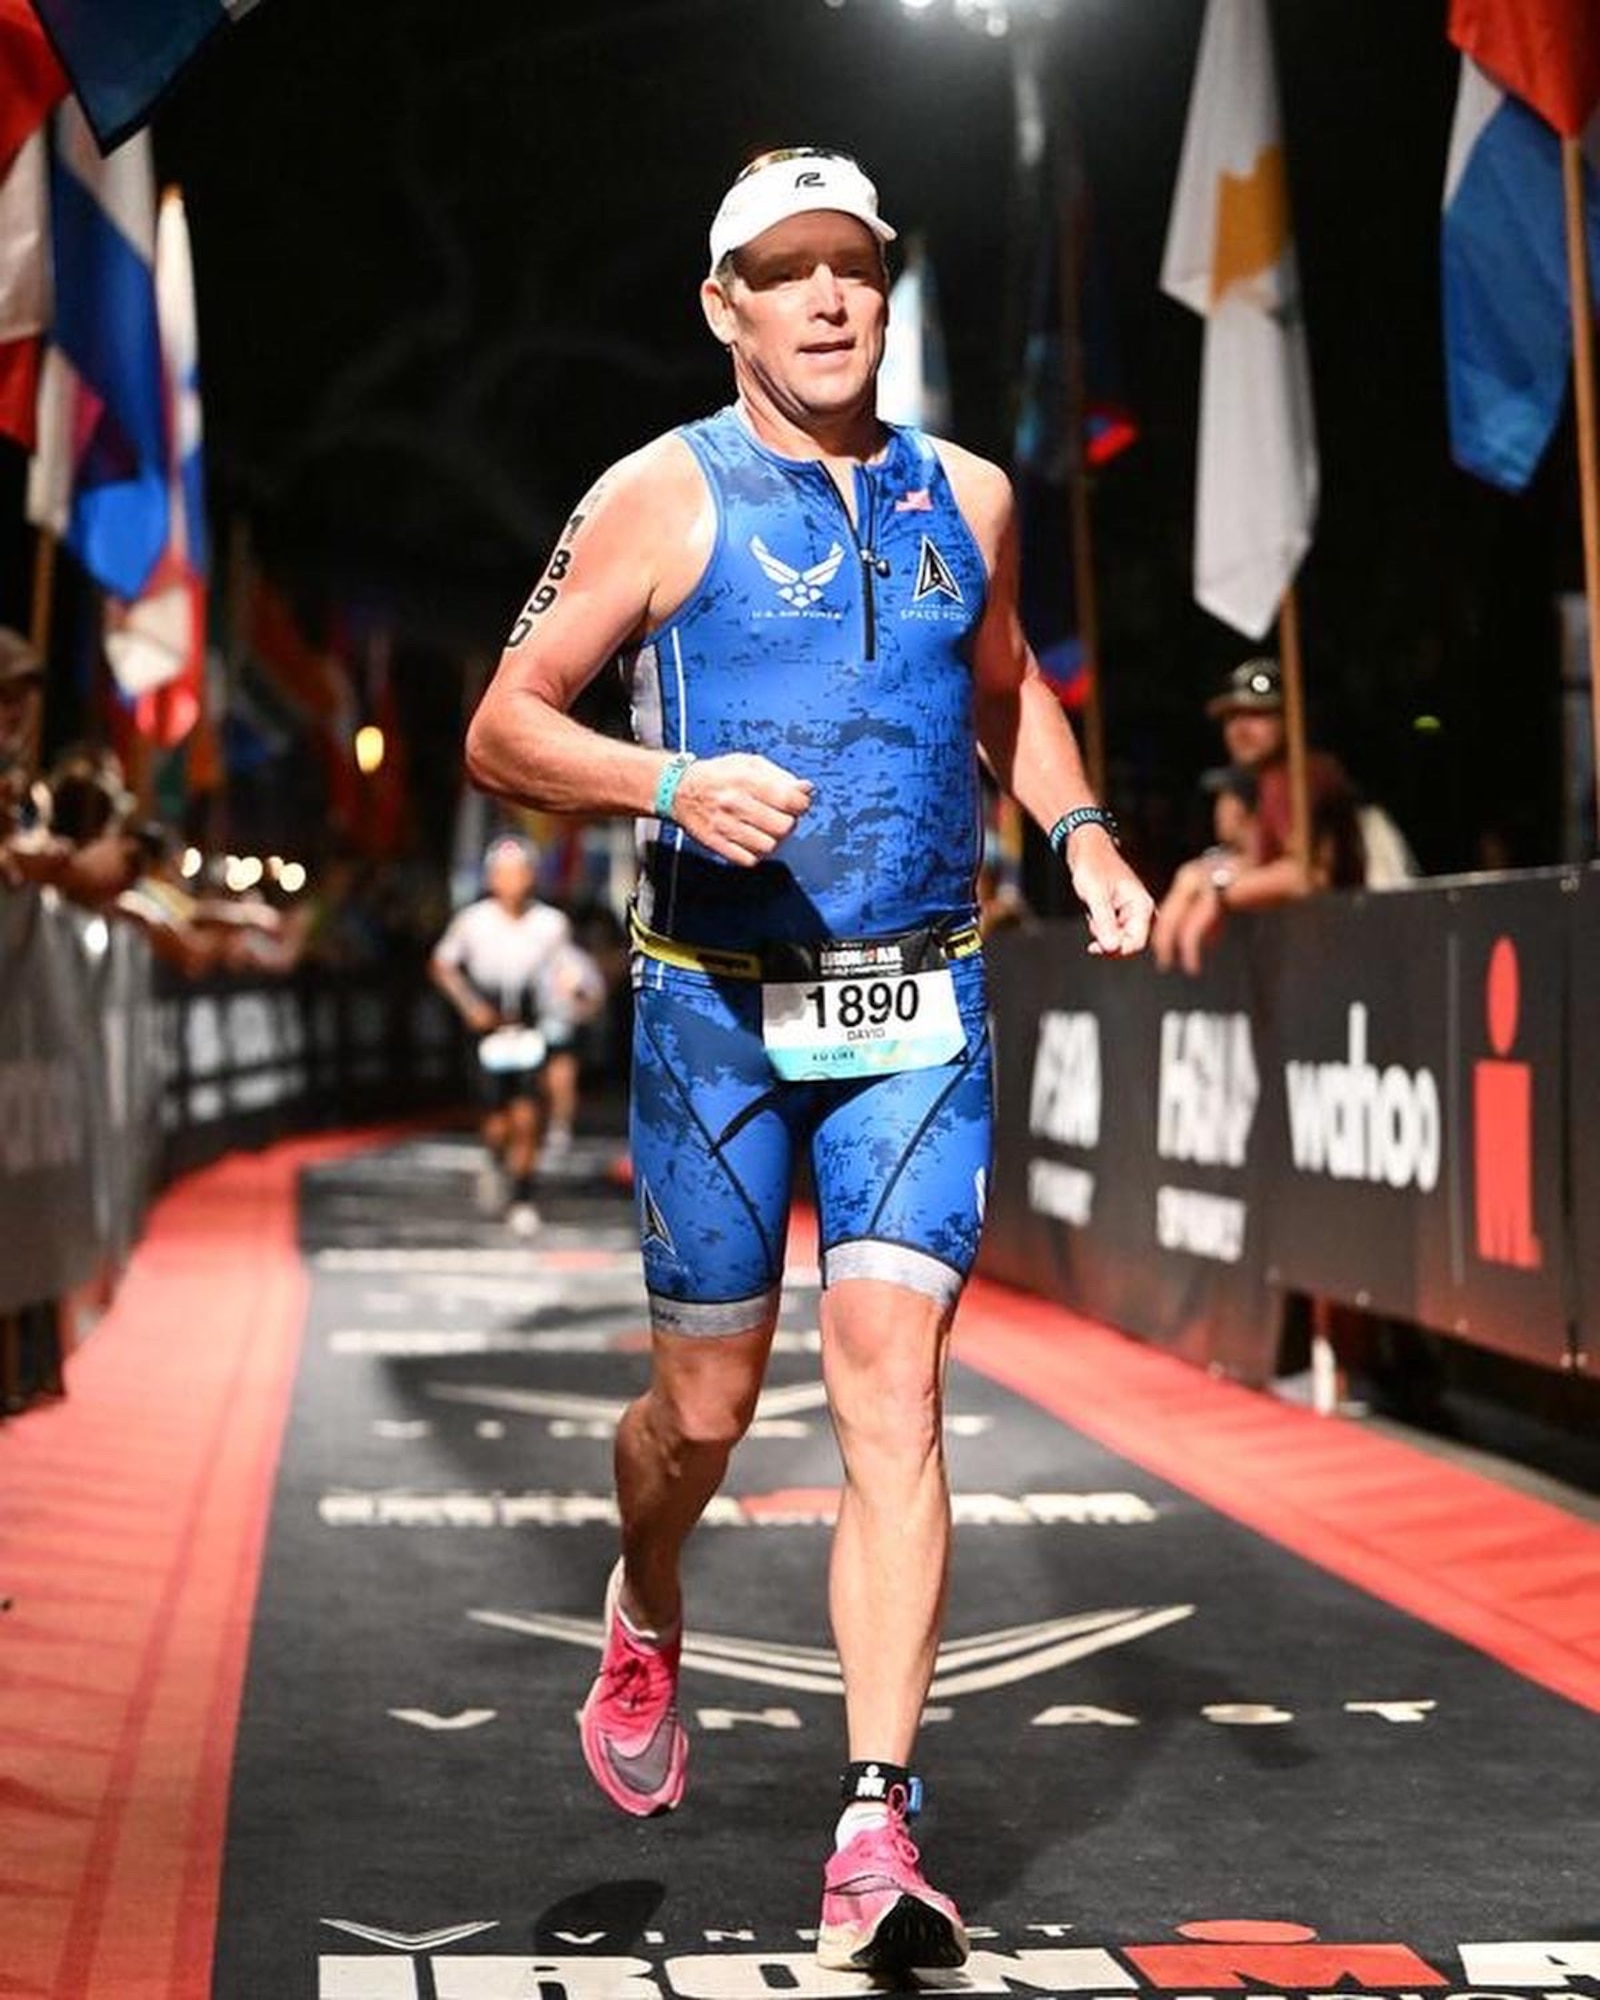 Airman to Ironman: General practices what he preaches when it comes to fitness